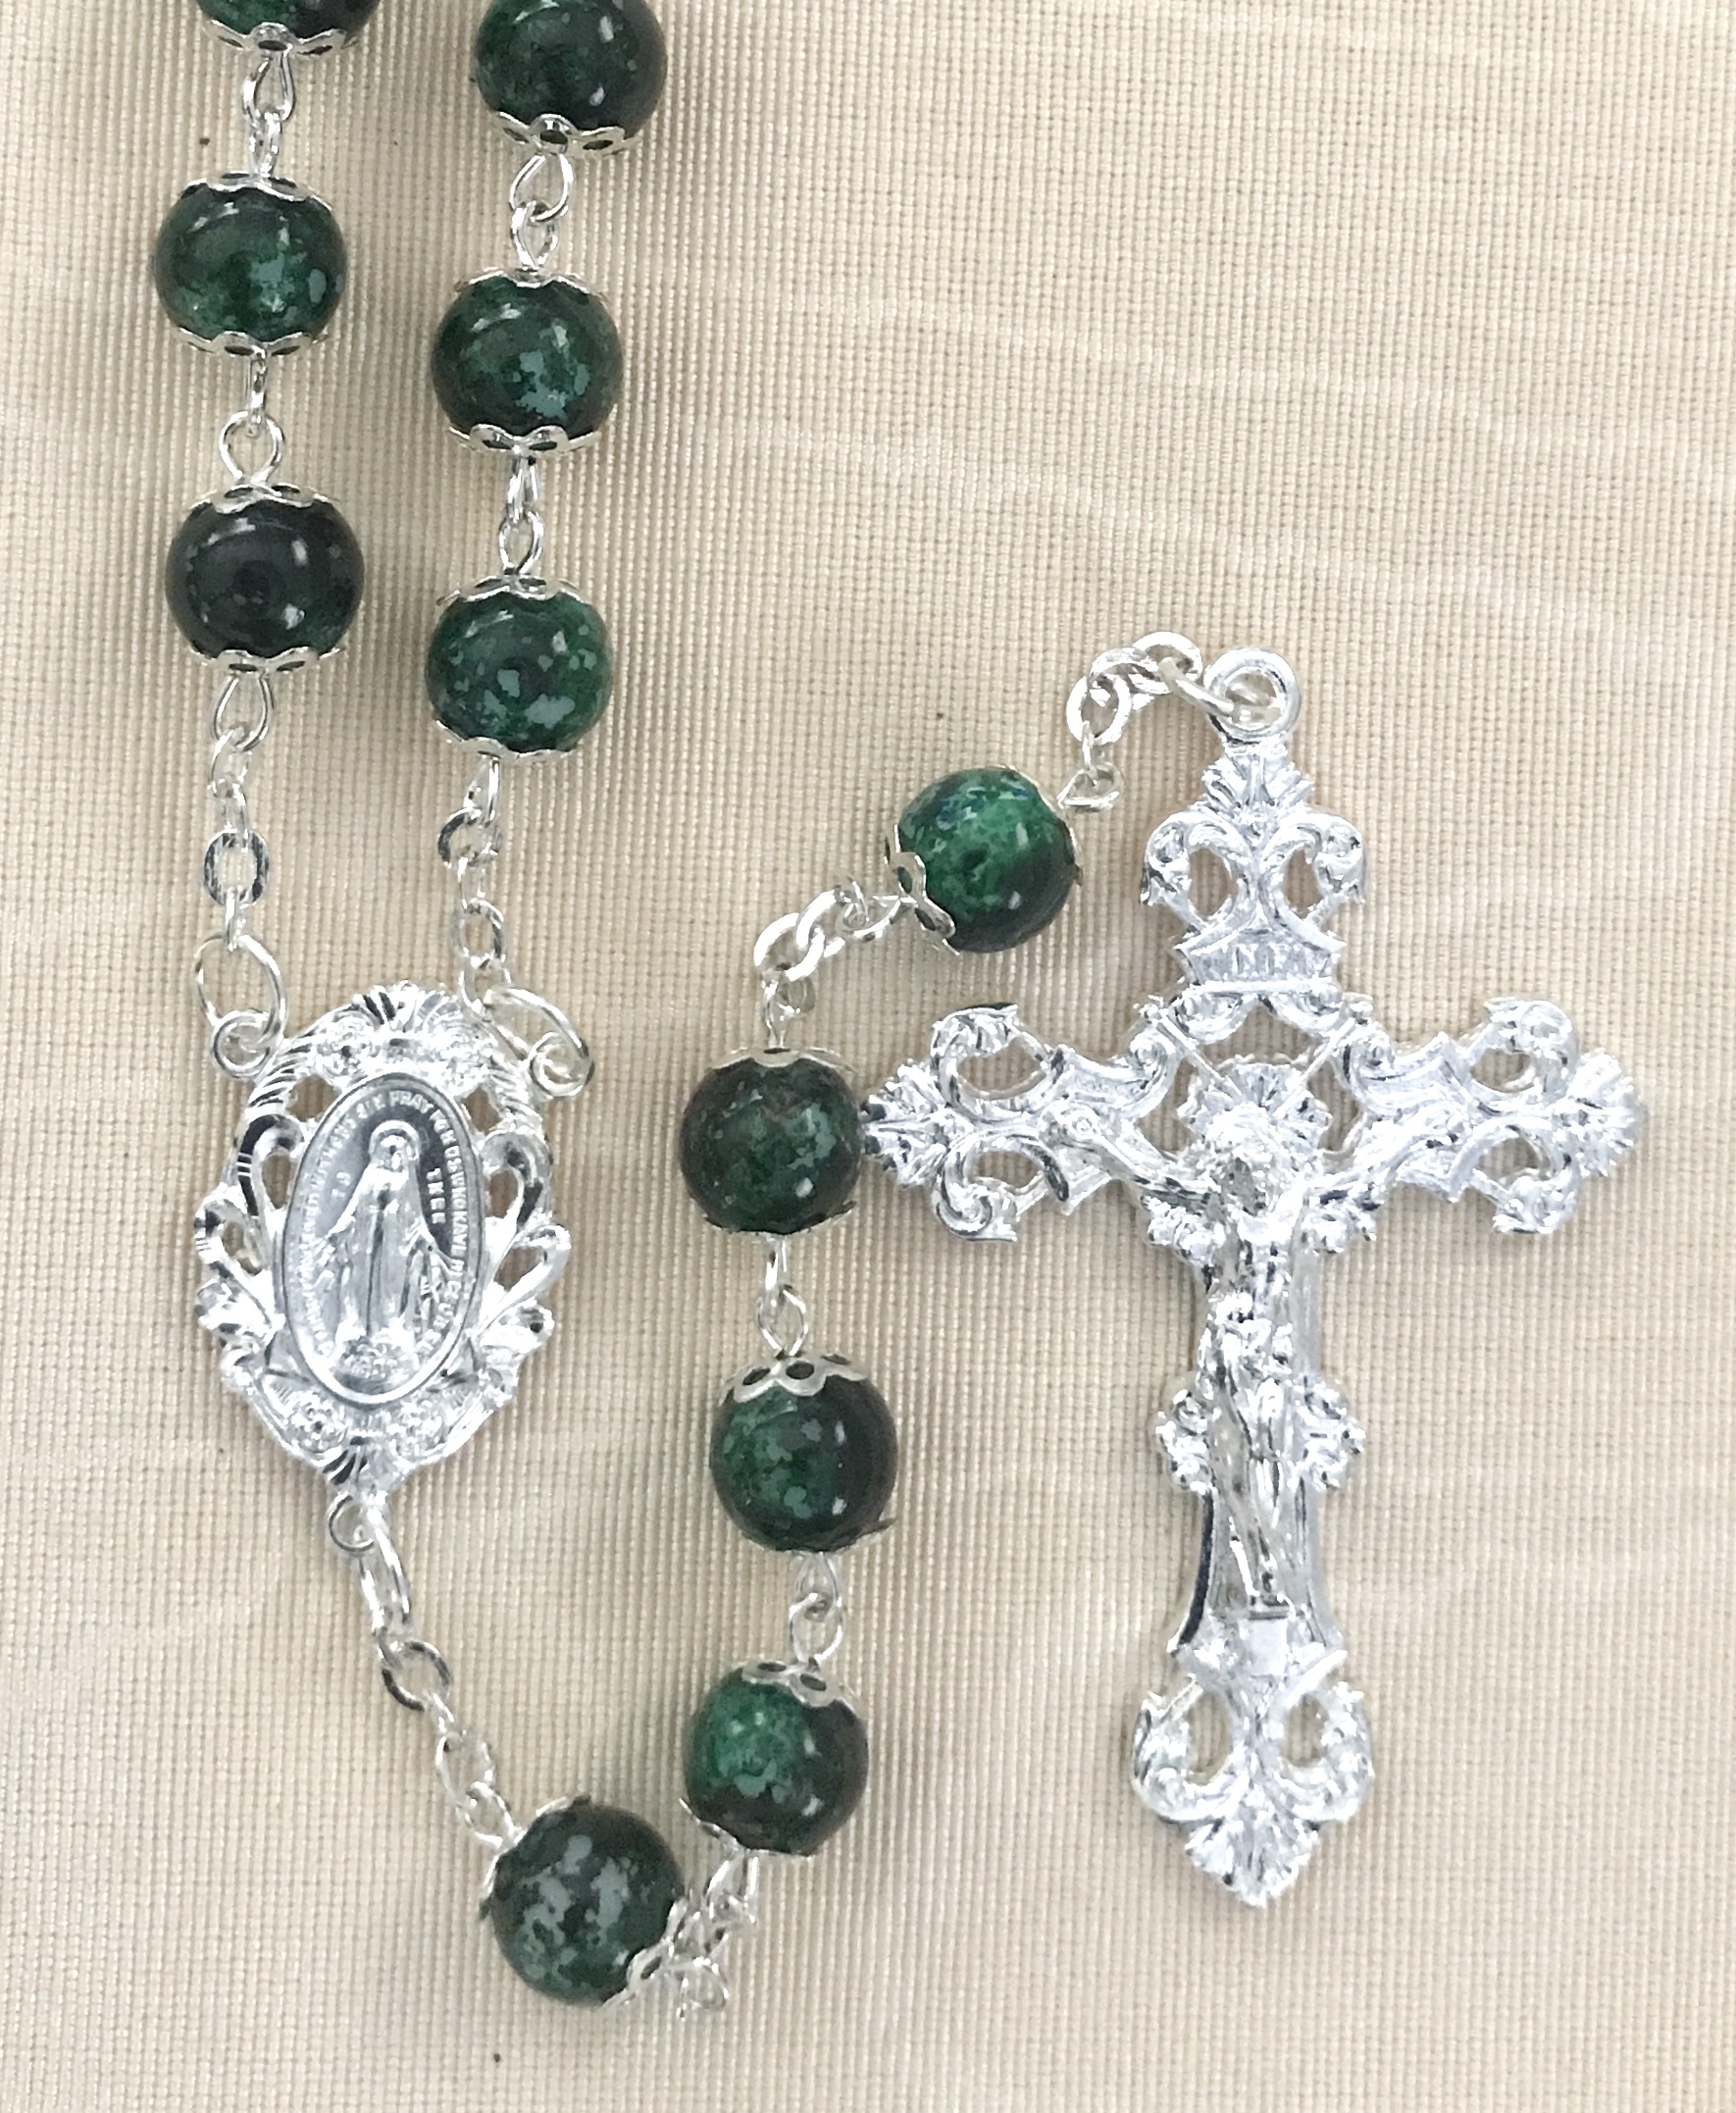 8mm EMERALD DOUBLE CAPPED ROSARY WITH STERLING SILVER PLATED CRUCIFIX AND CENTER GIFT BOXED